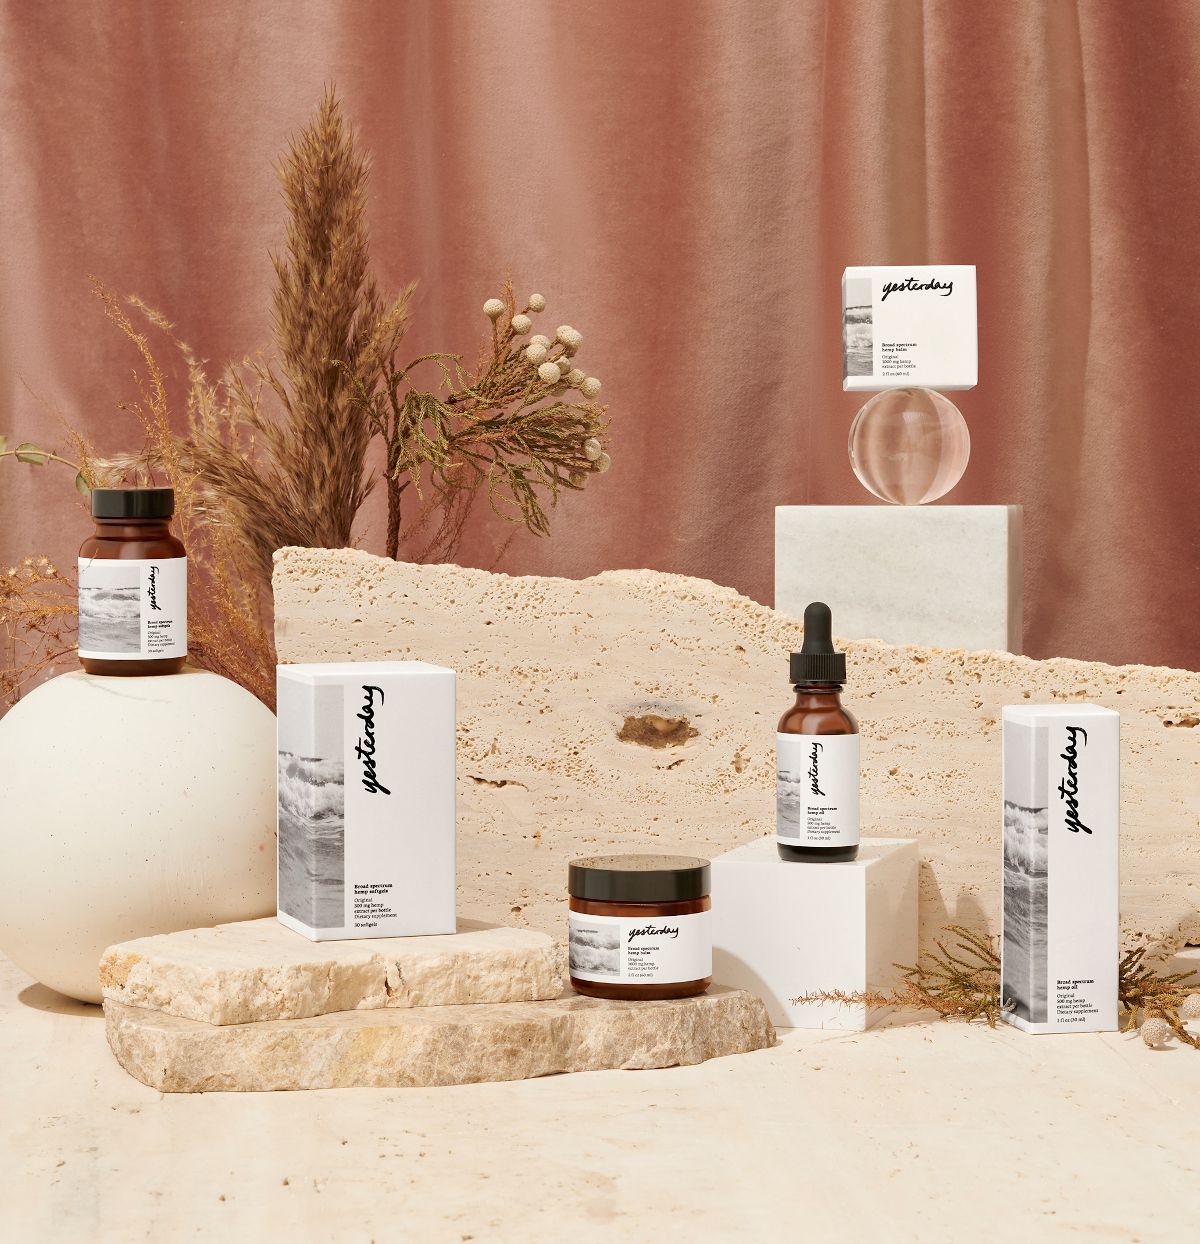 How Yesterday Wellness is bridging the gap to provide self-care CBD products to women